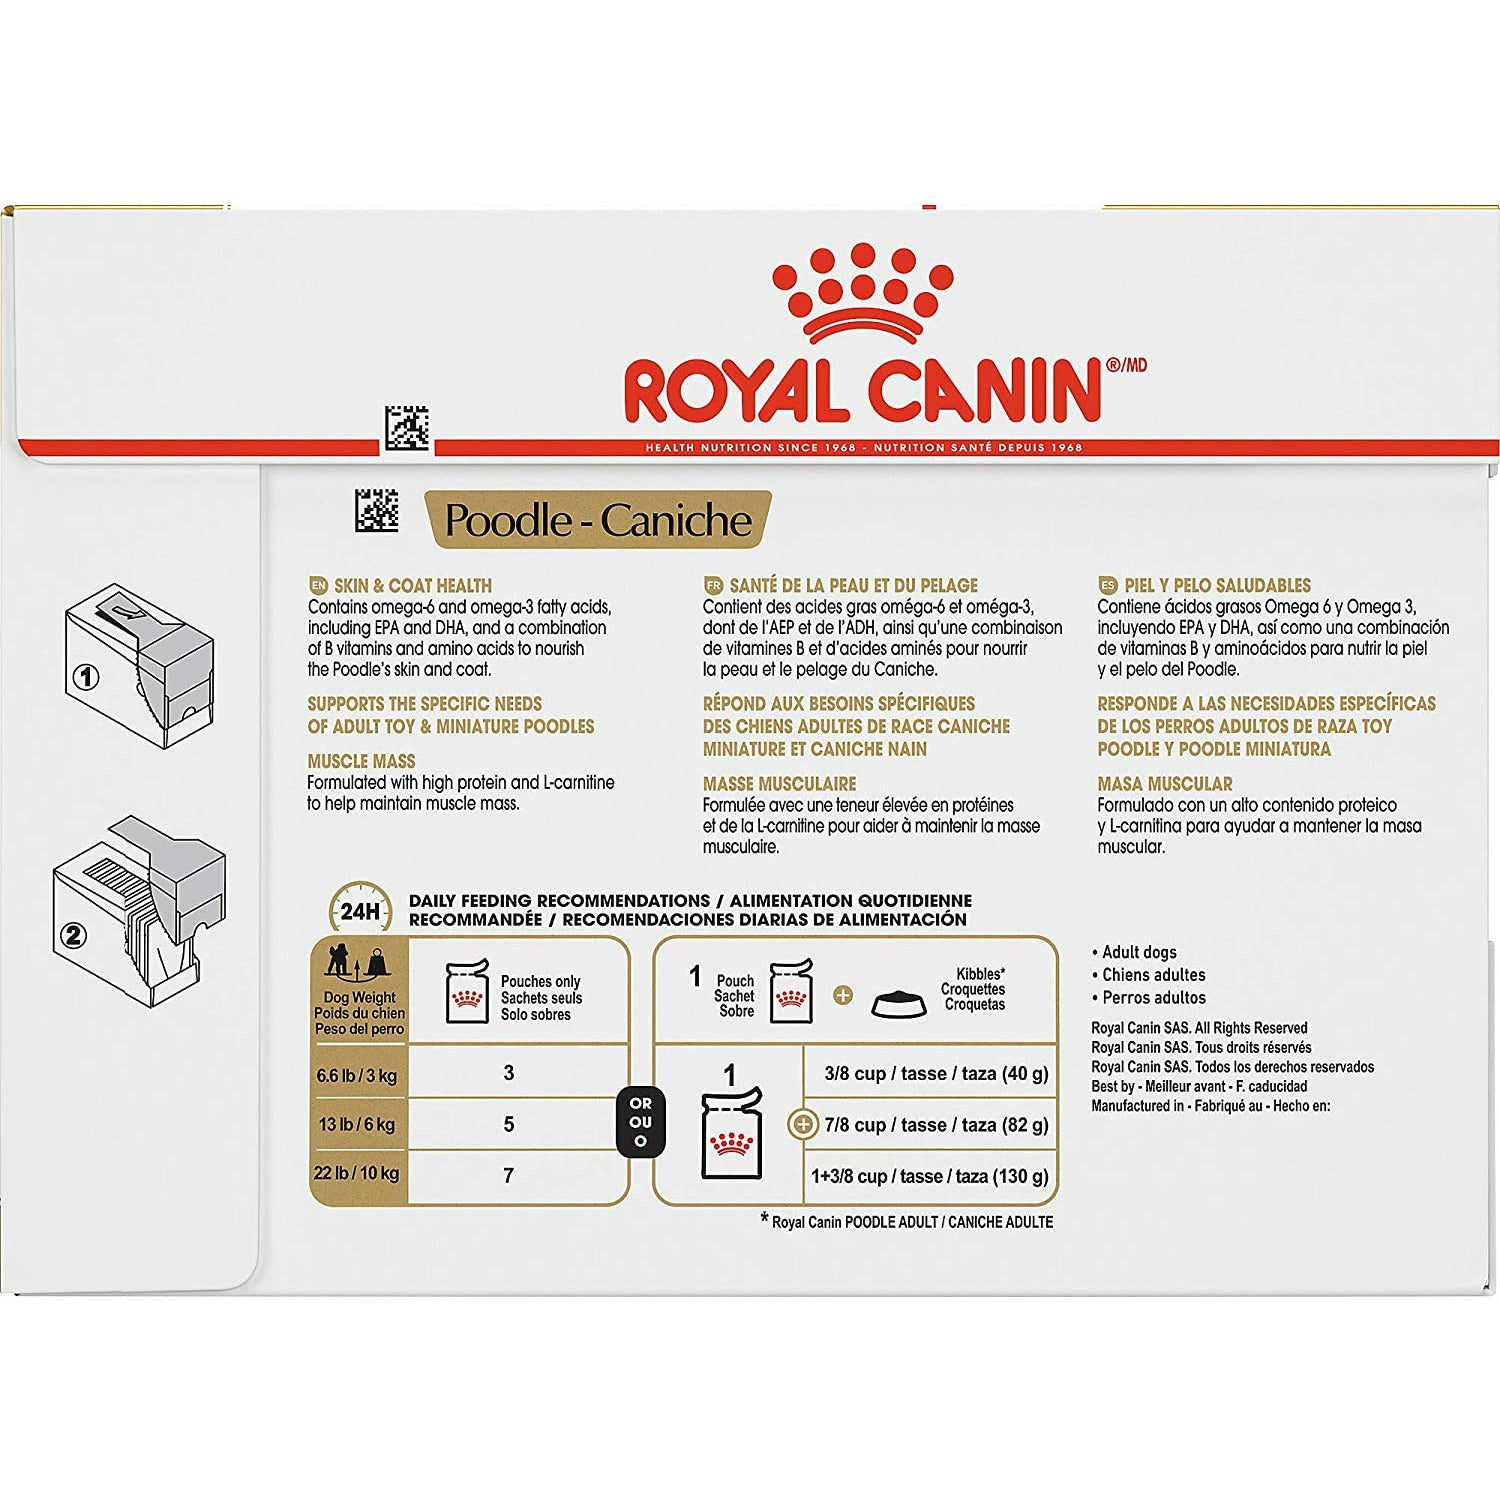 Royal Canin Wet Dog Food Pouch Poodle  Canned Dog Food  | PetMax Canada